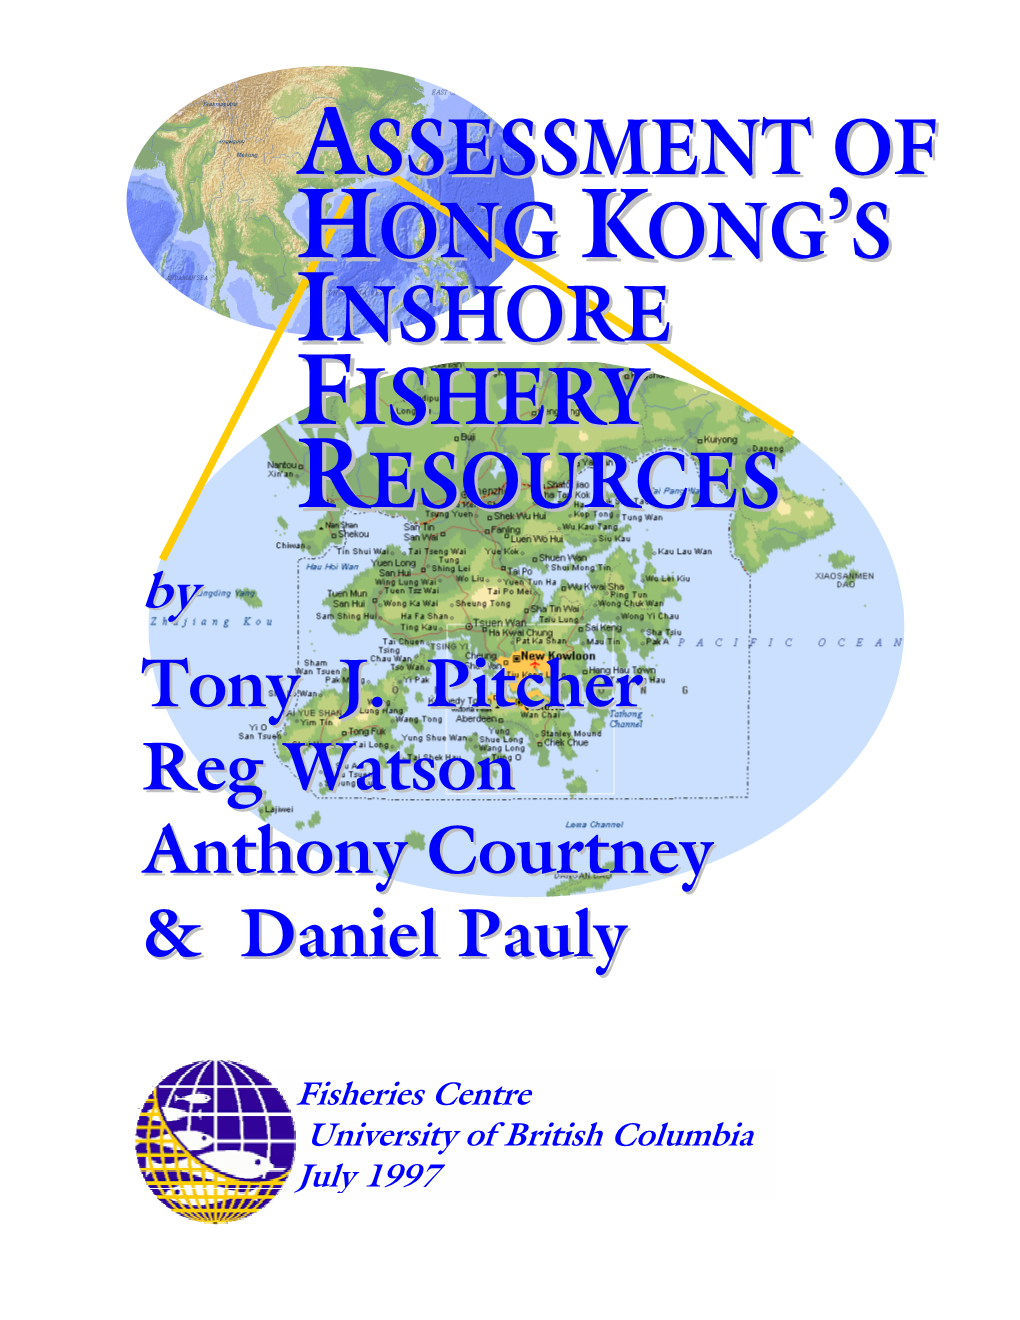 Fishery Resources